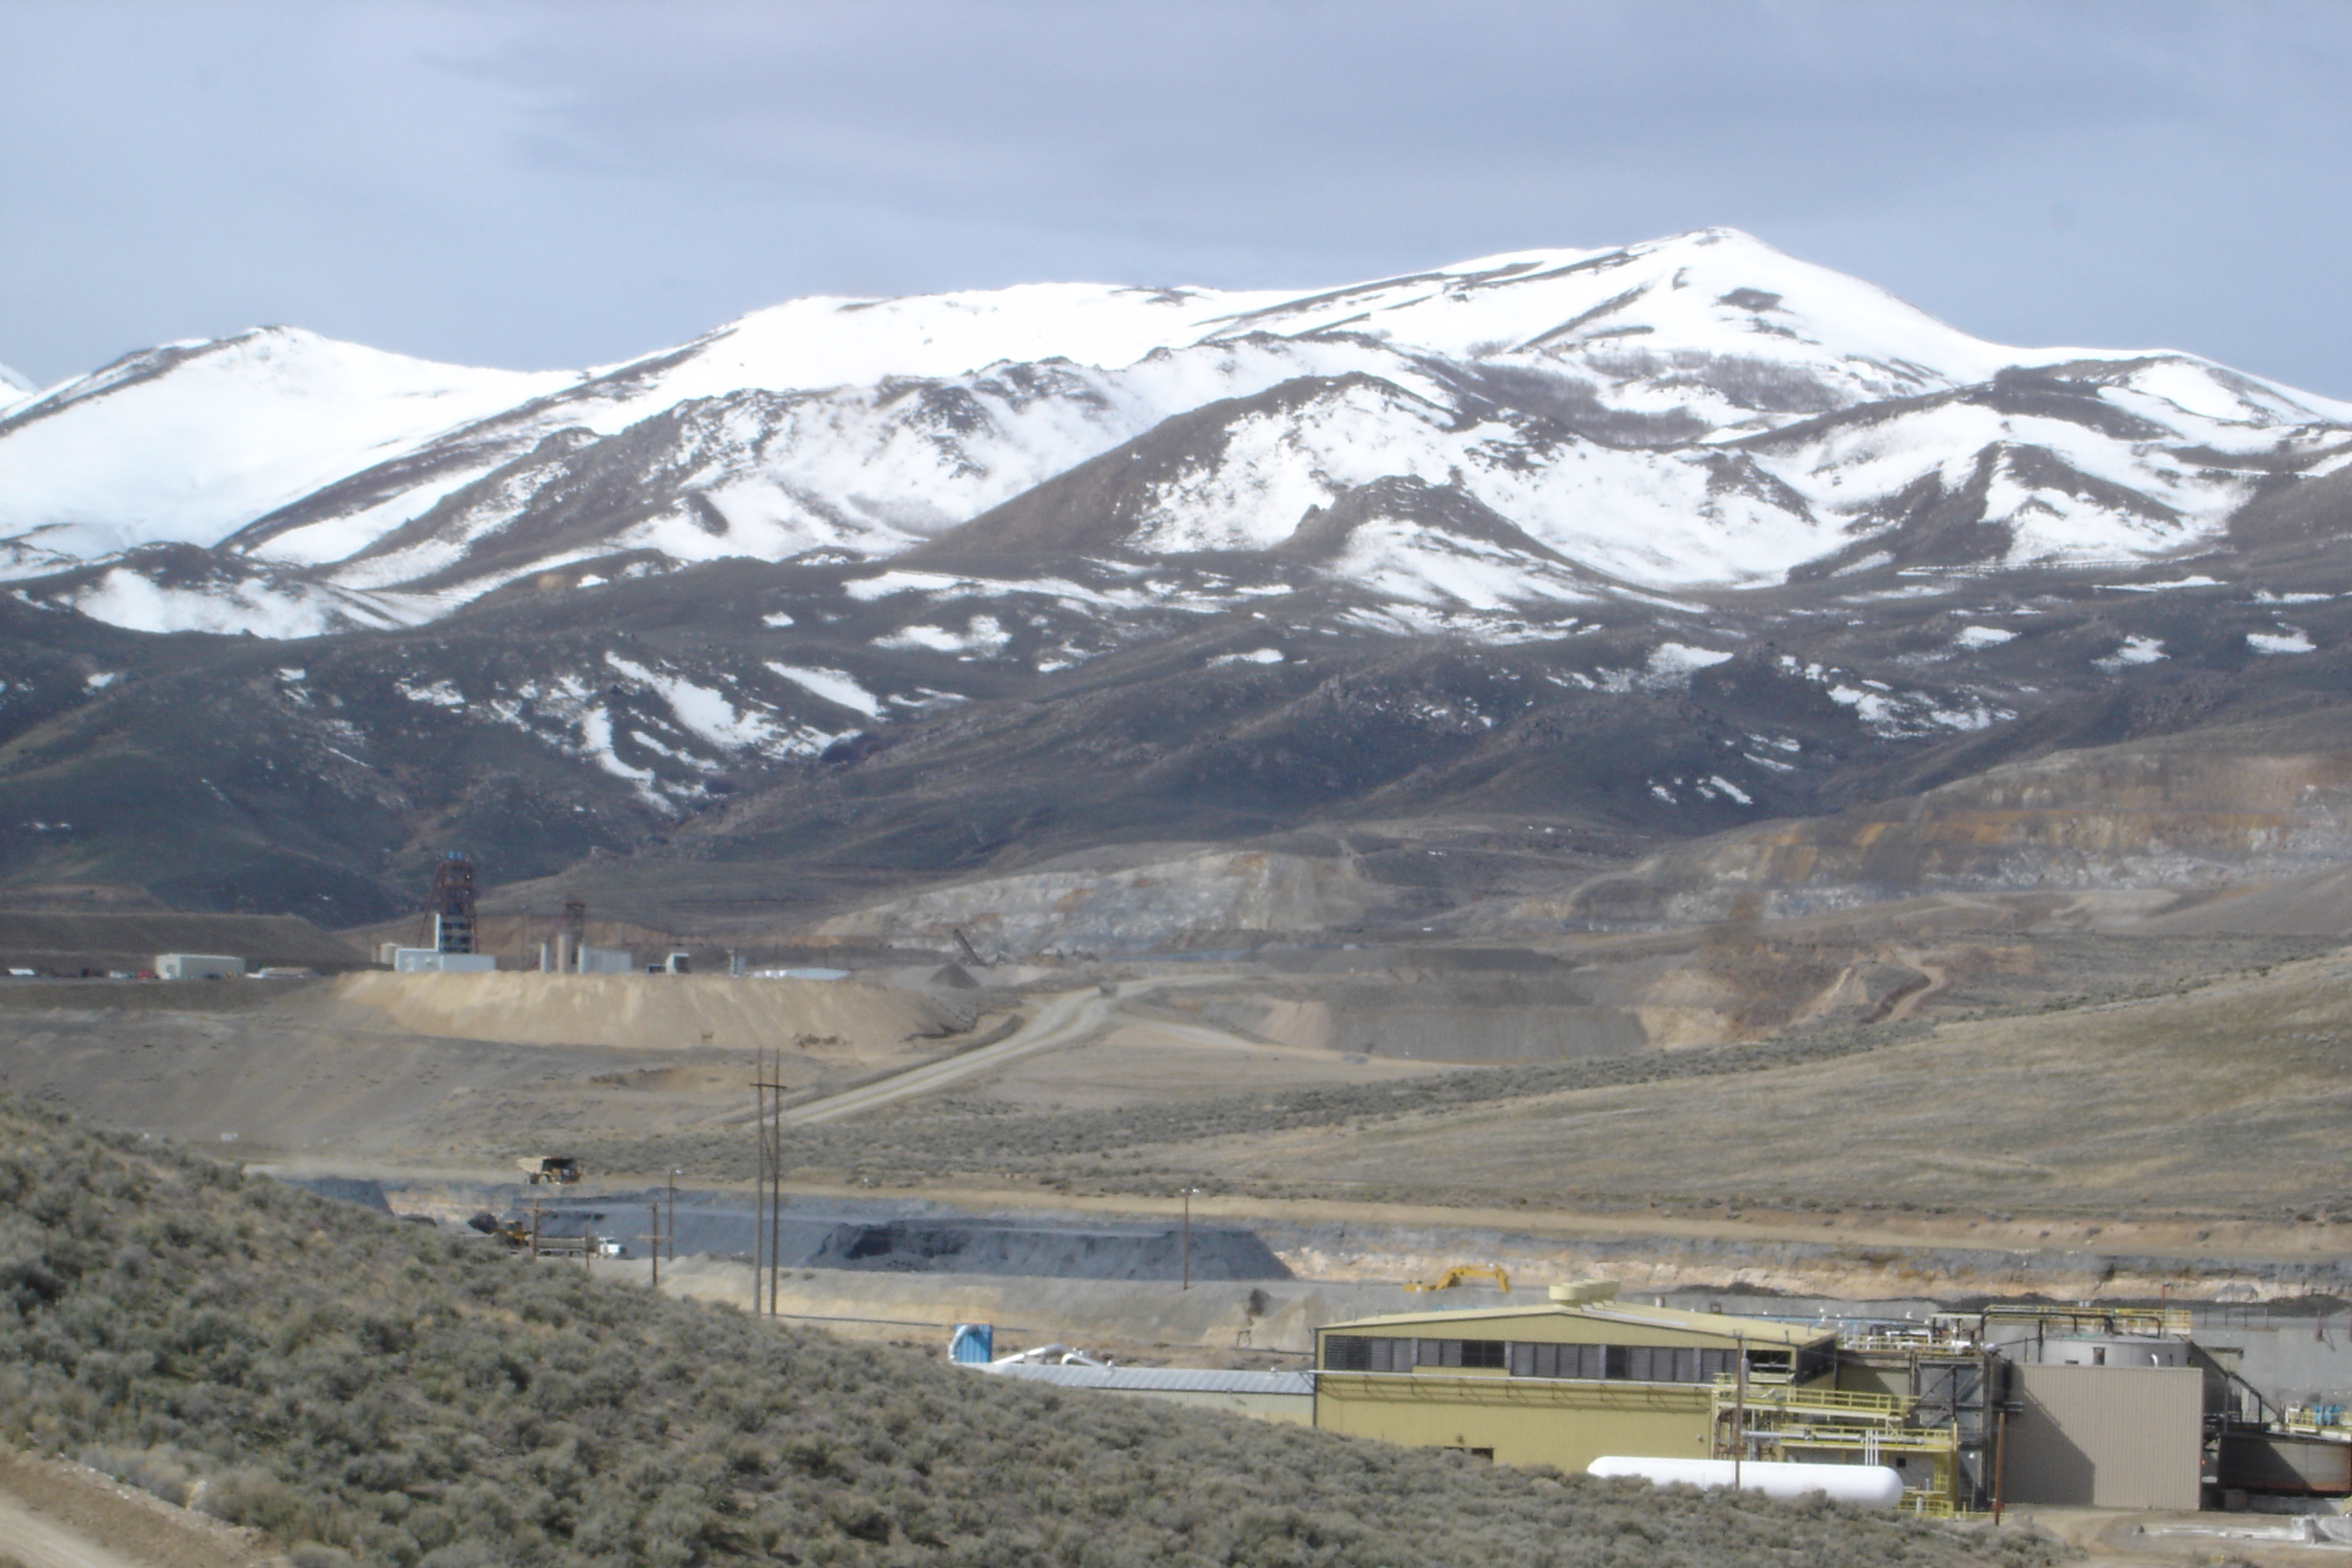 Snow covered mountains behind a mining operation.